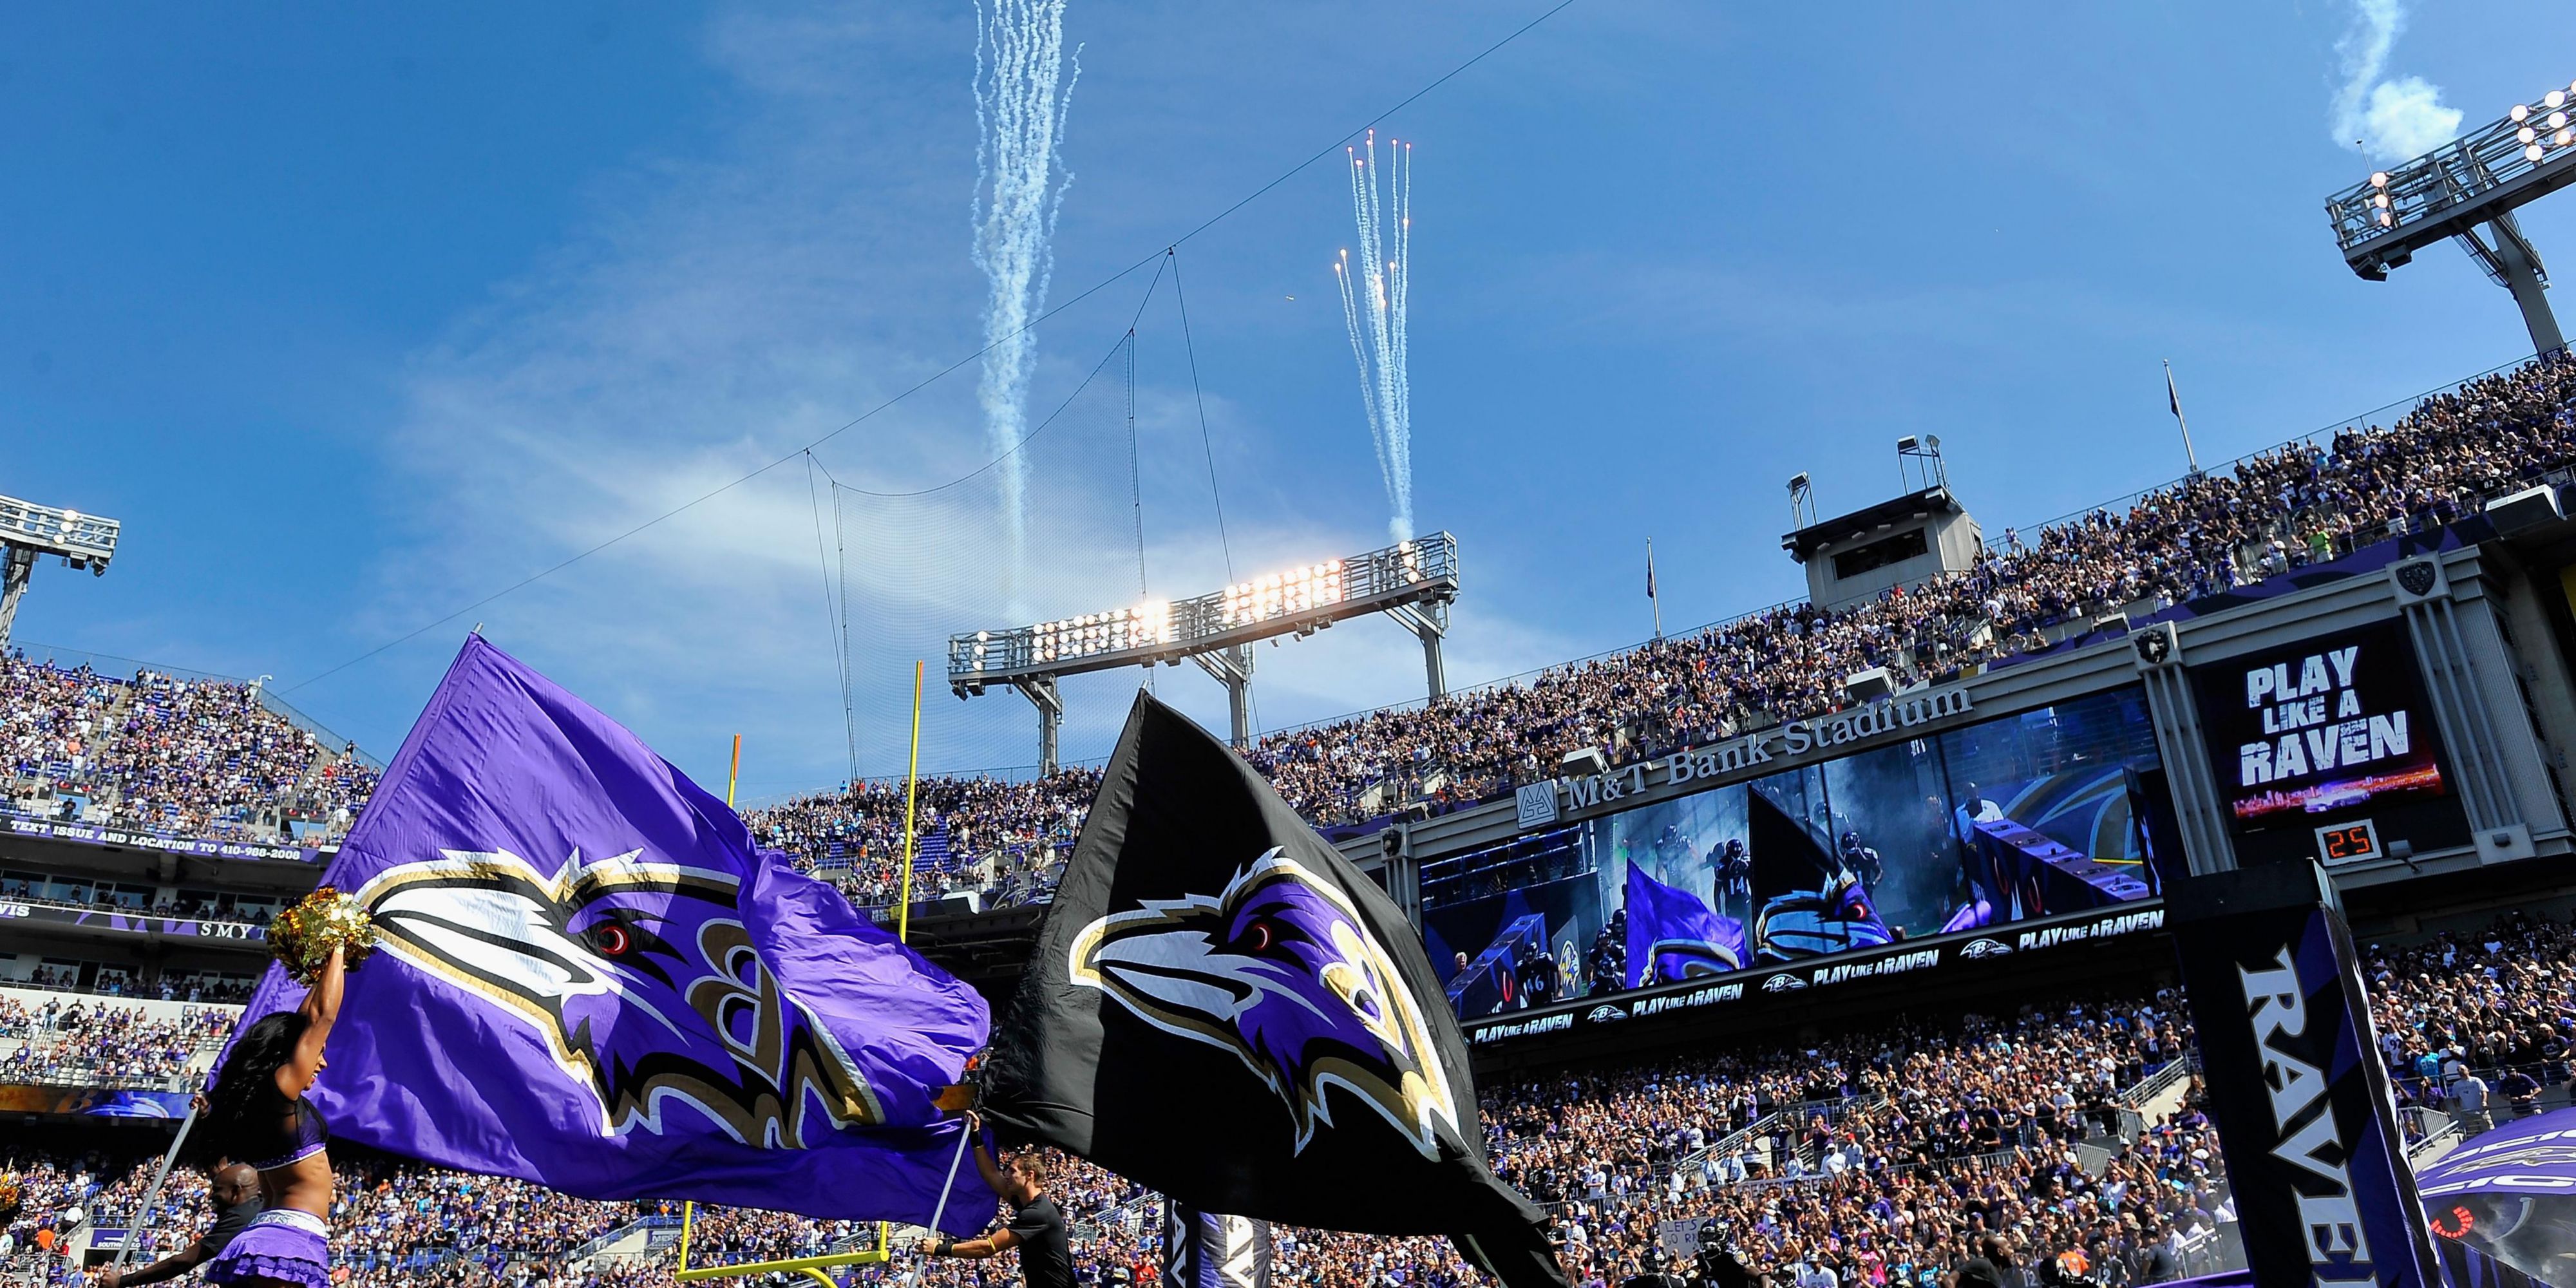 Stay with us to see the Baltimore Ravens or your favorite music artists play at M&T Bank Stadium! Enjoy tailgating! We are located less than 5 minutes away from M&T Bank Stadium. 